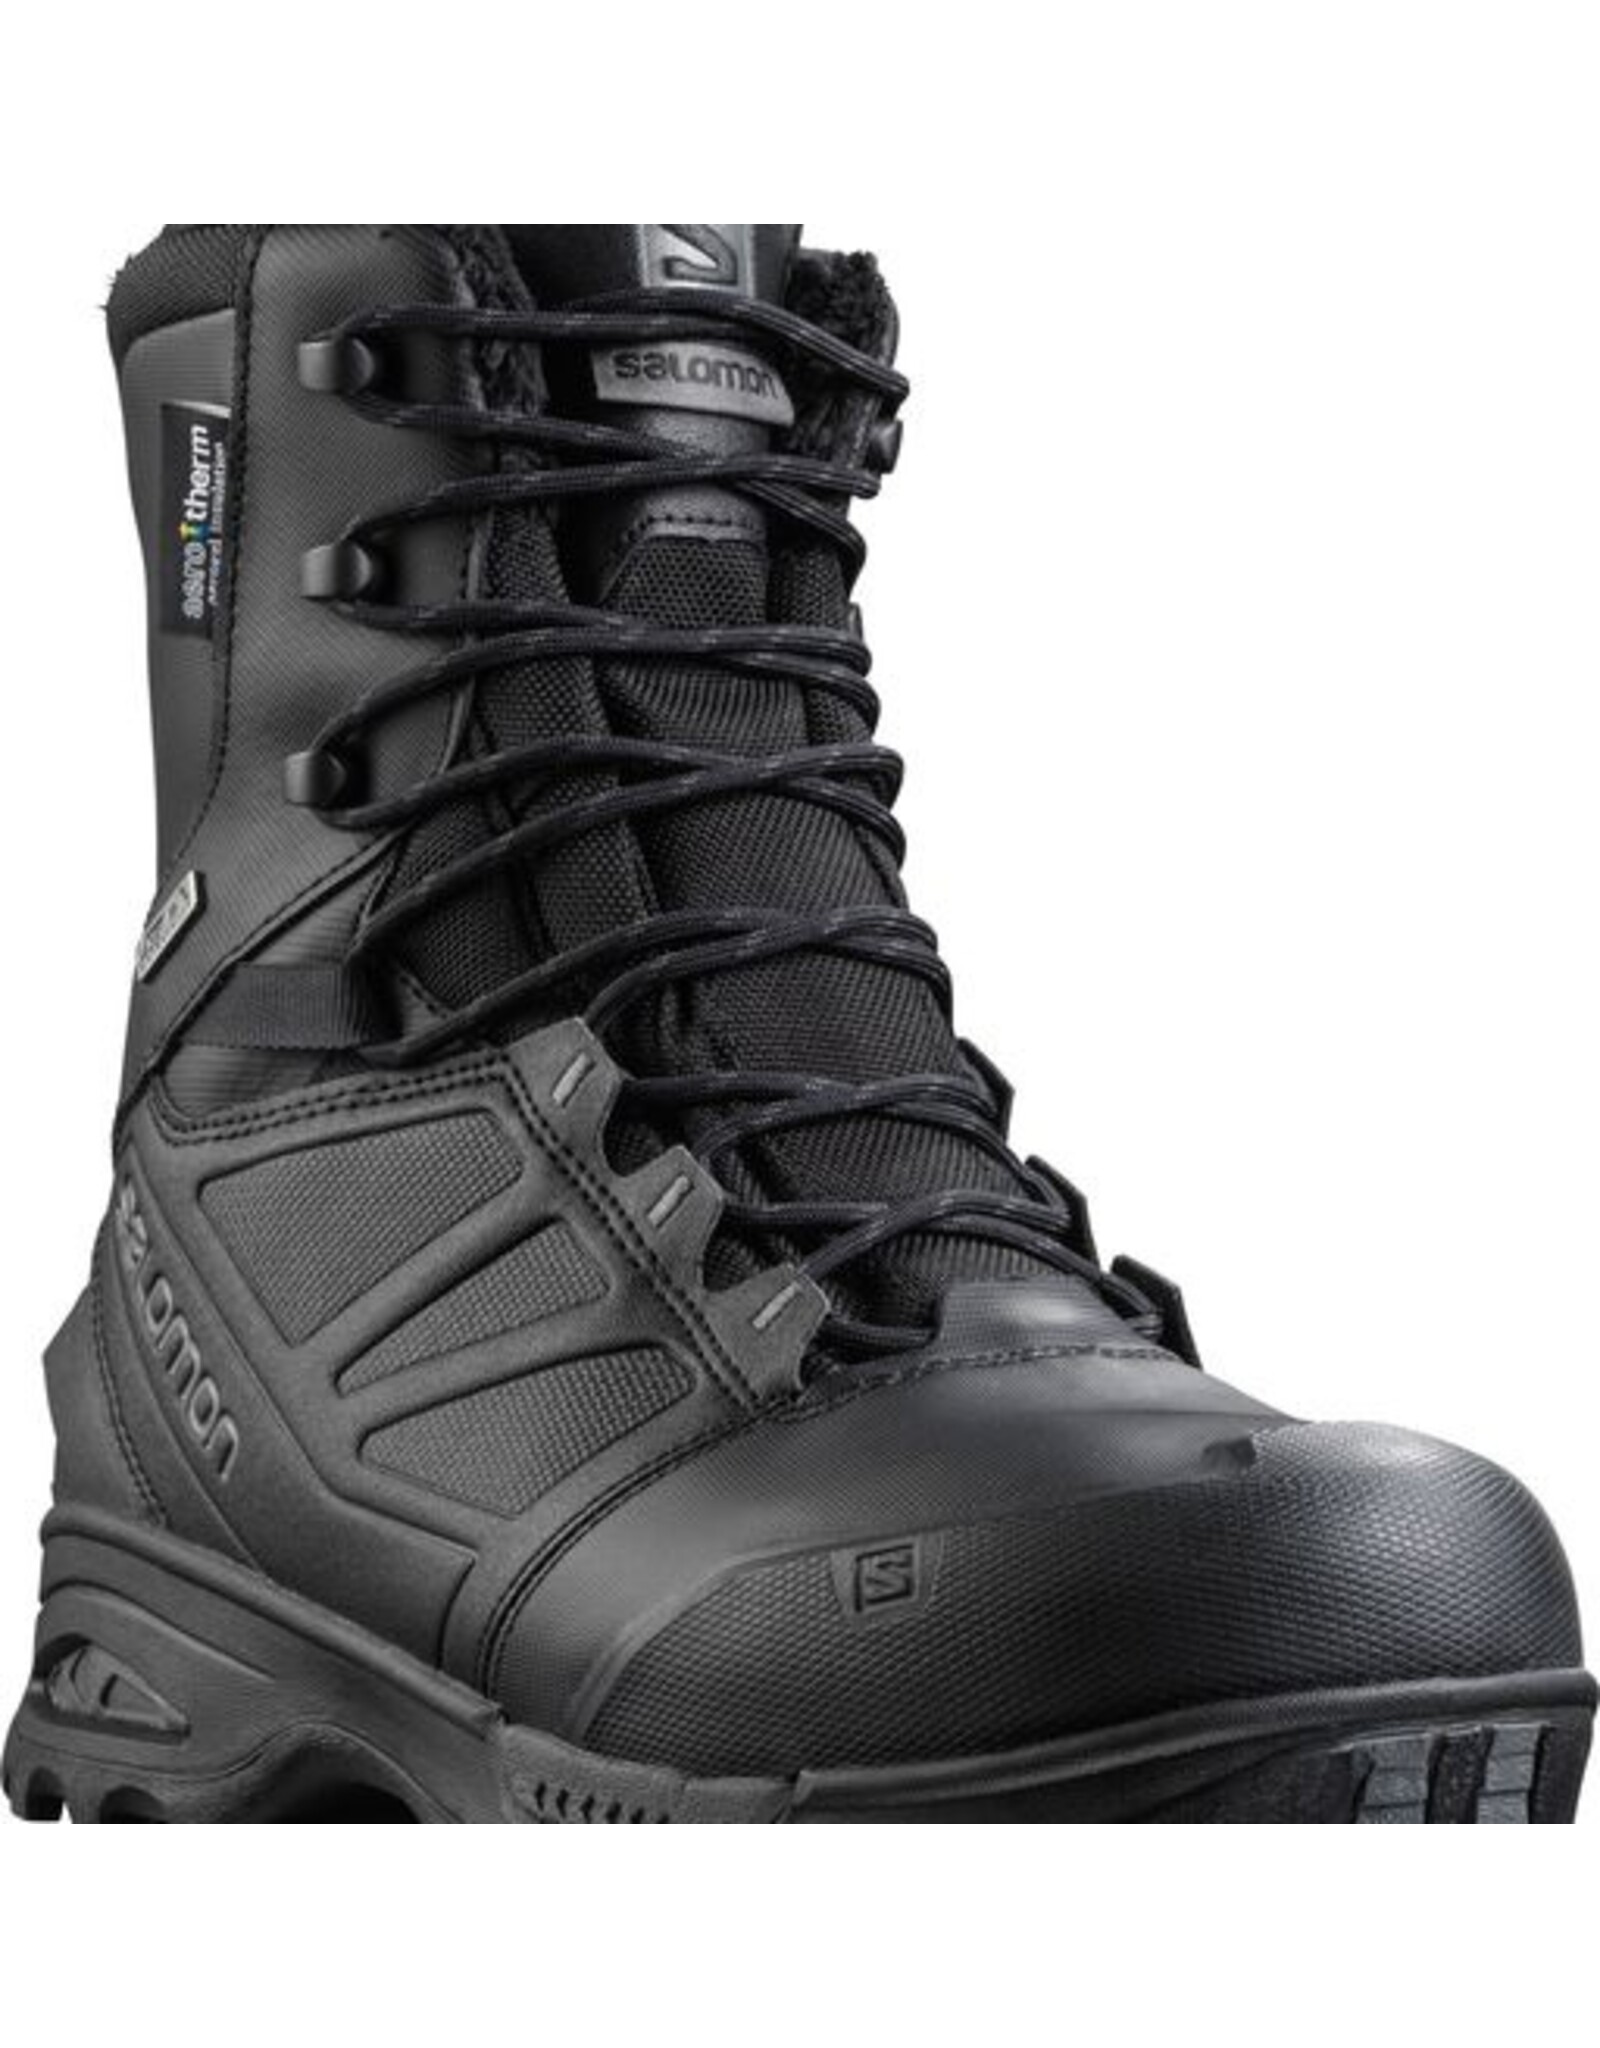 SALOMON TOUNDRA FORCES CSWP INSULATED TACTICAL BOOT